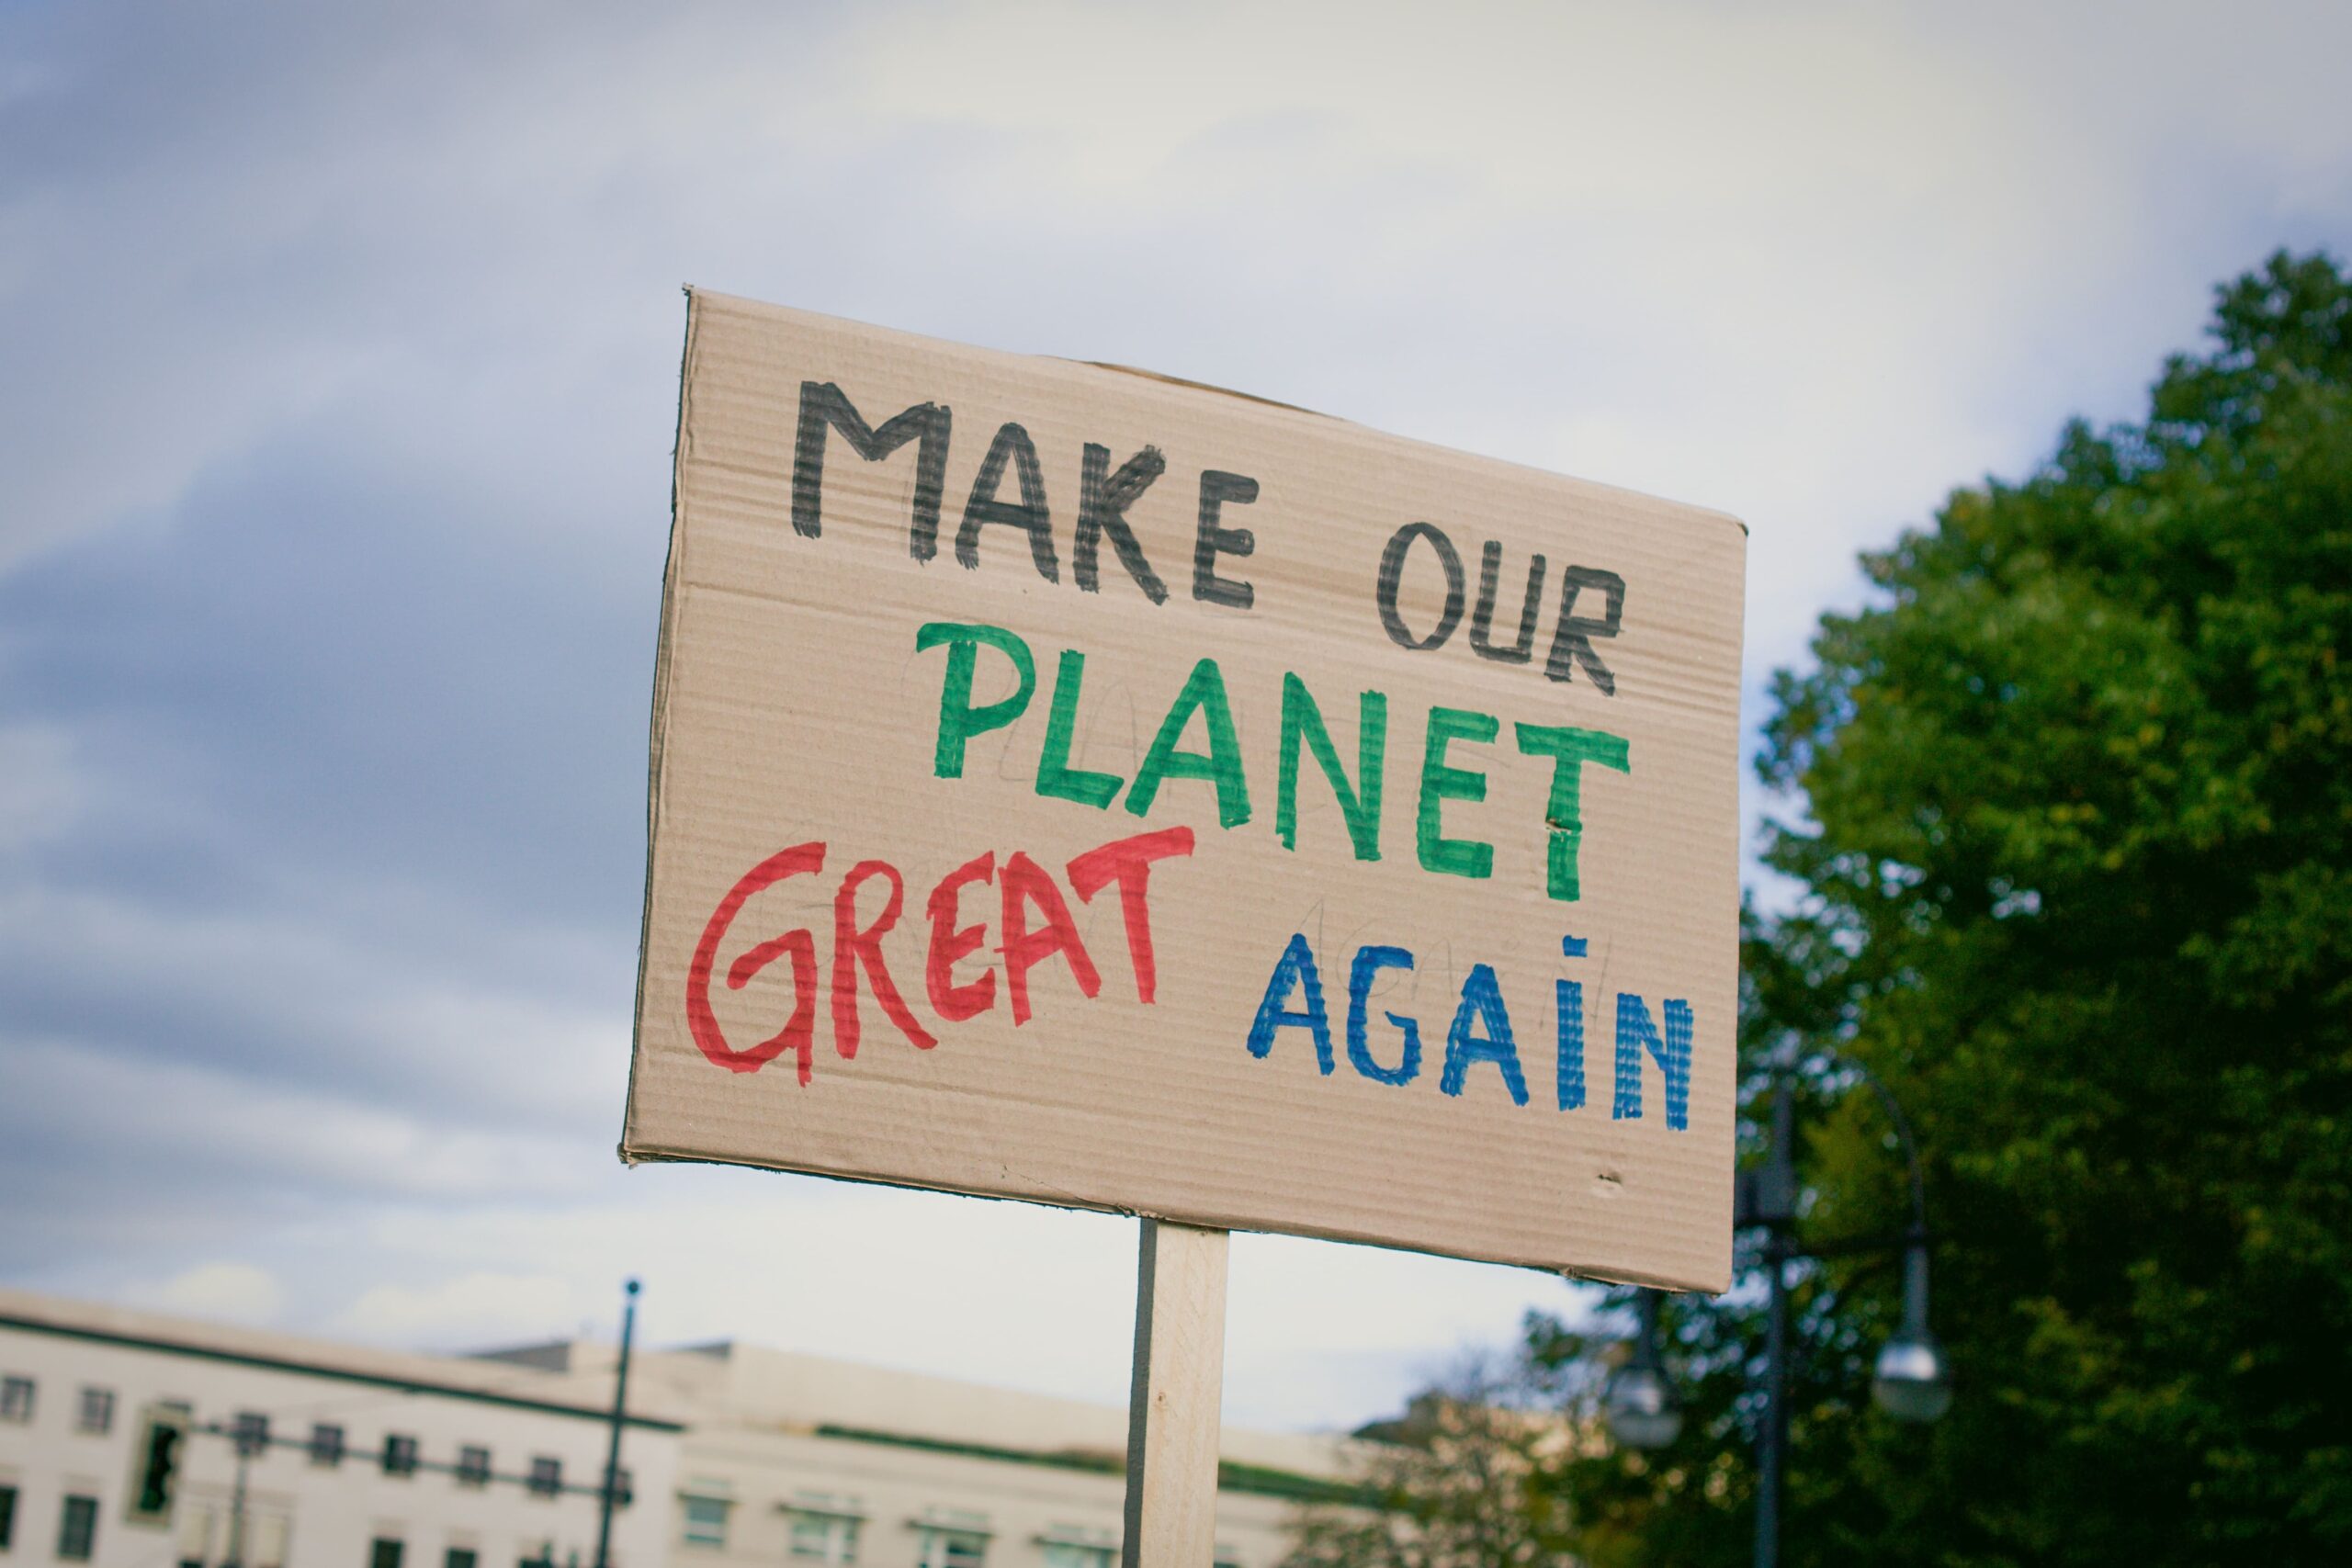 Make our planet great again